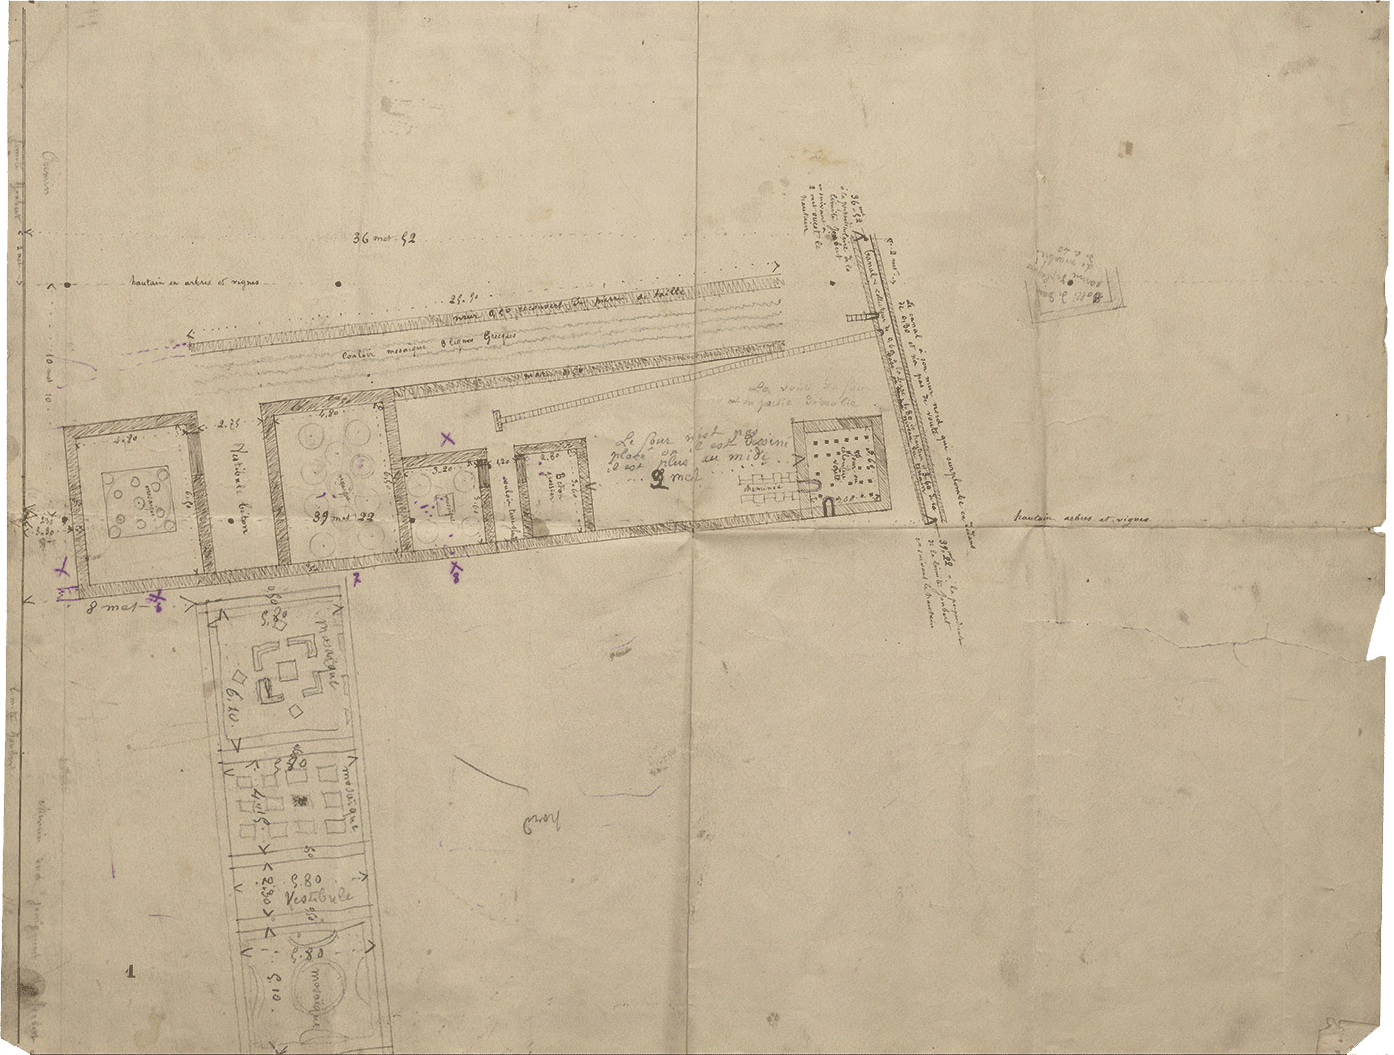 Figure 9. Sketch showing the excavation plan